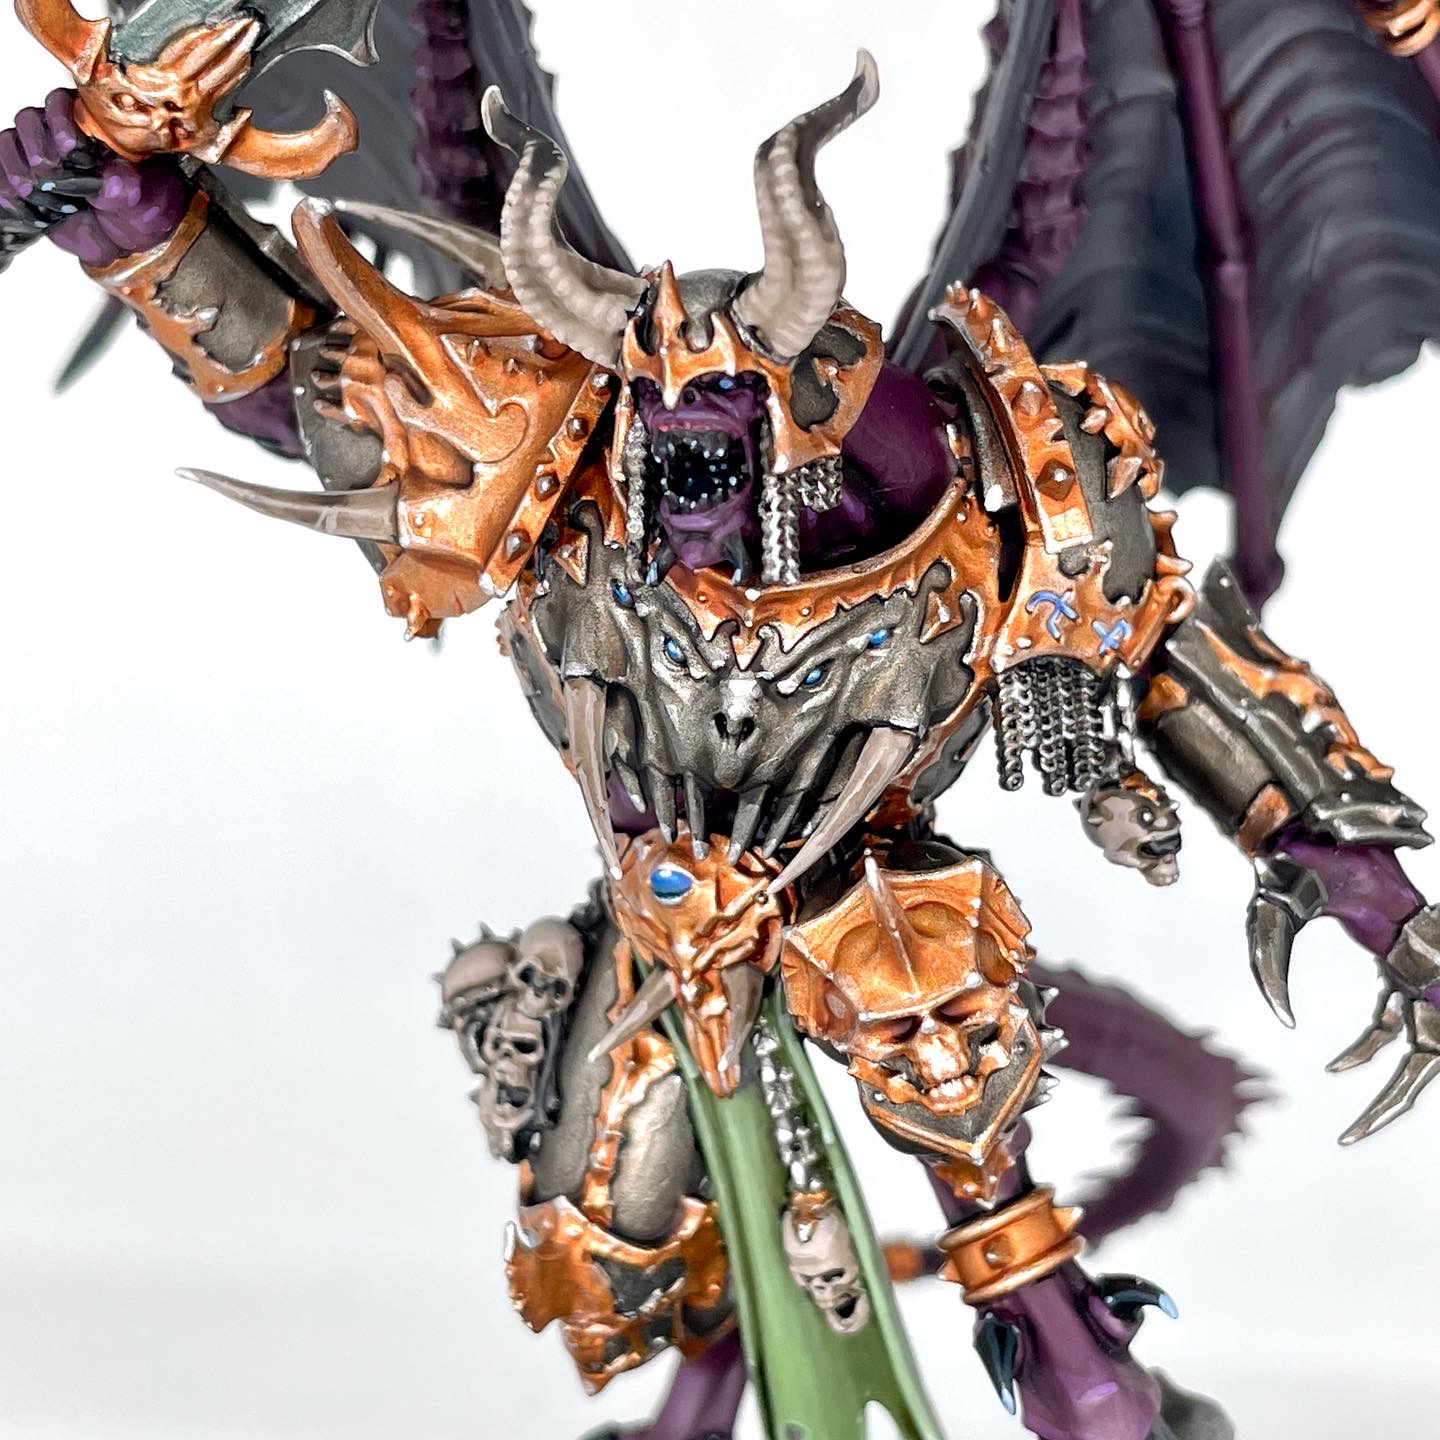 Model Review: The New Plastic Daemon Prince (Slaves to Darkness 